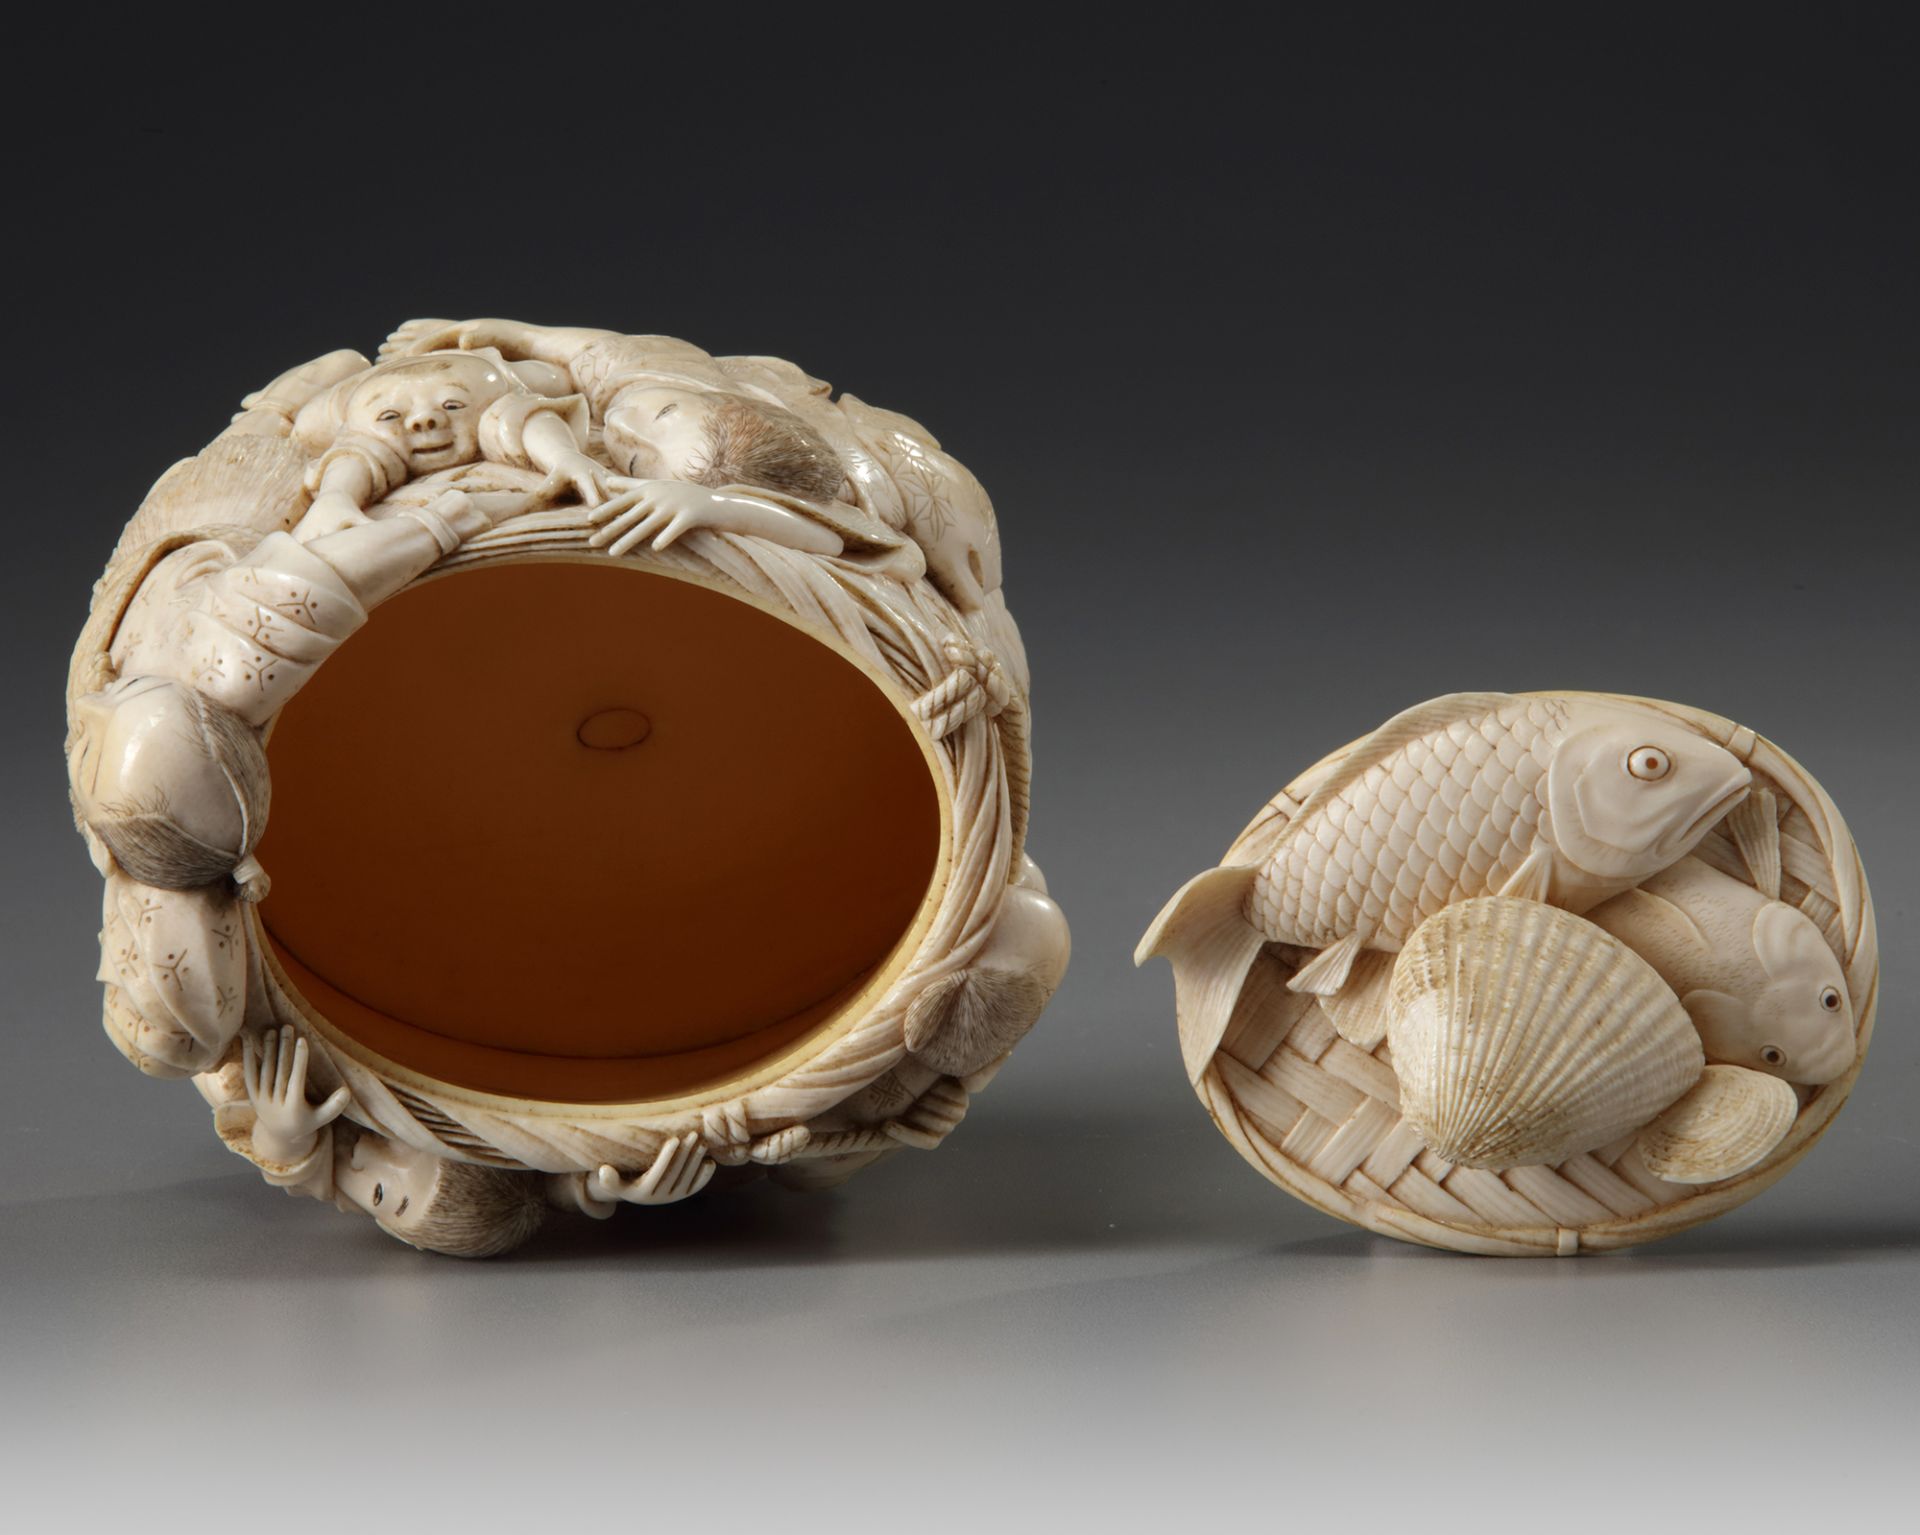 A JAPANESE IVORY CARVED BOX AND COVER, MEIJI PERIOD (1868-1912) - Image 4 of 5